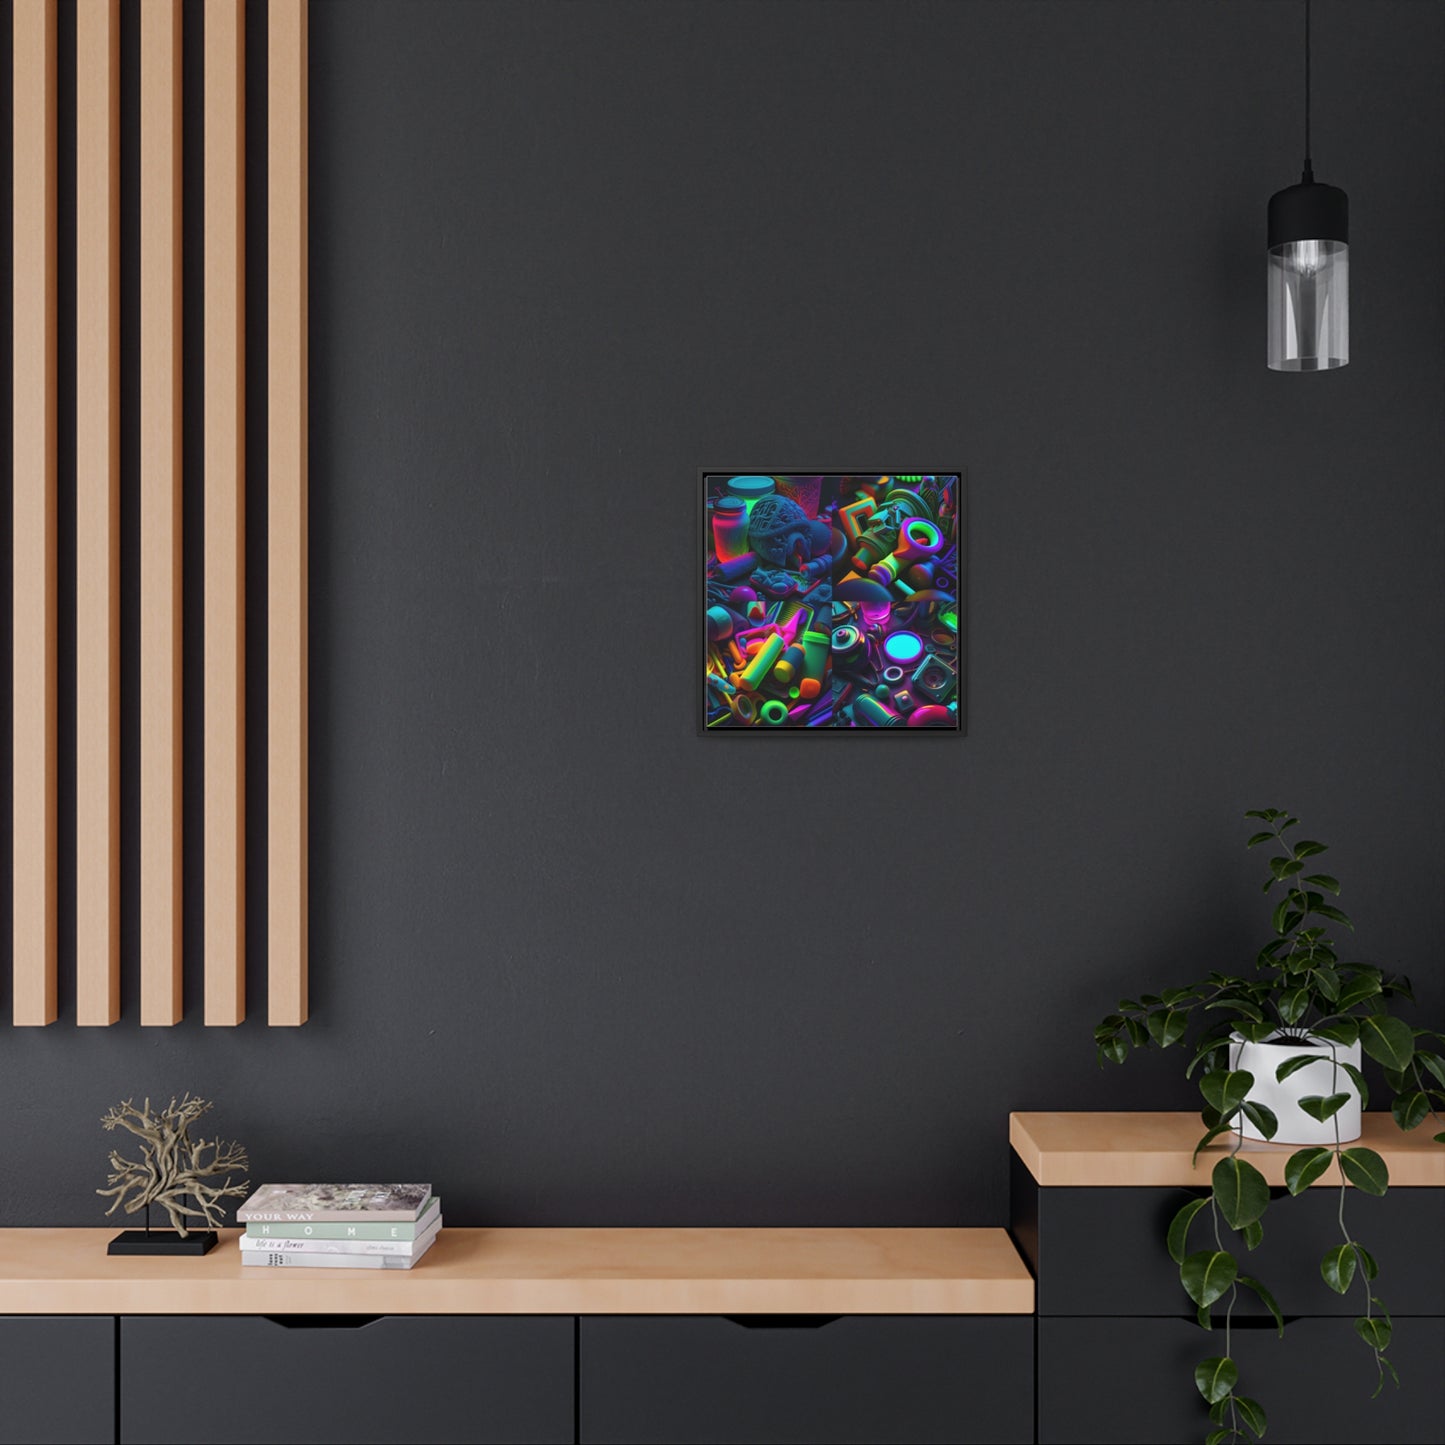 Gallery Canvas Wraps, Square Frame Neon Glow